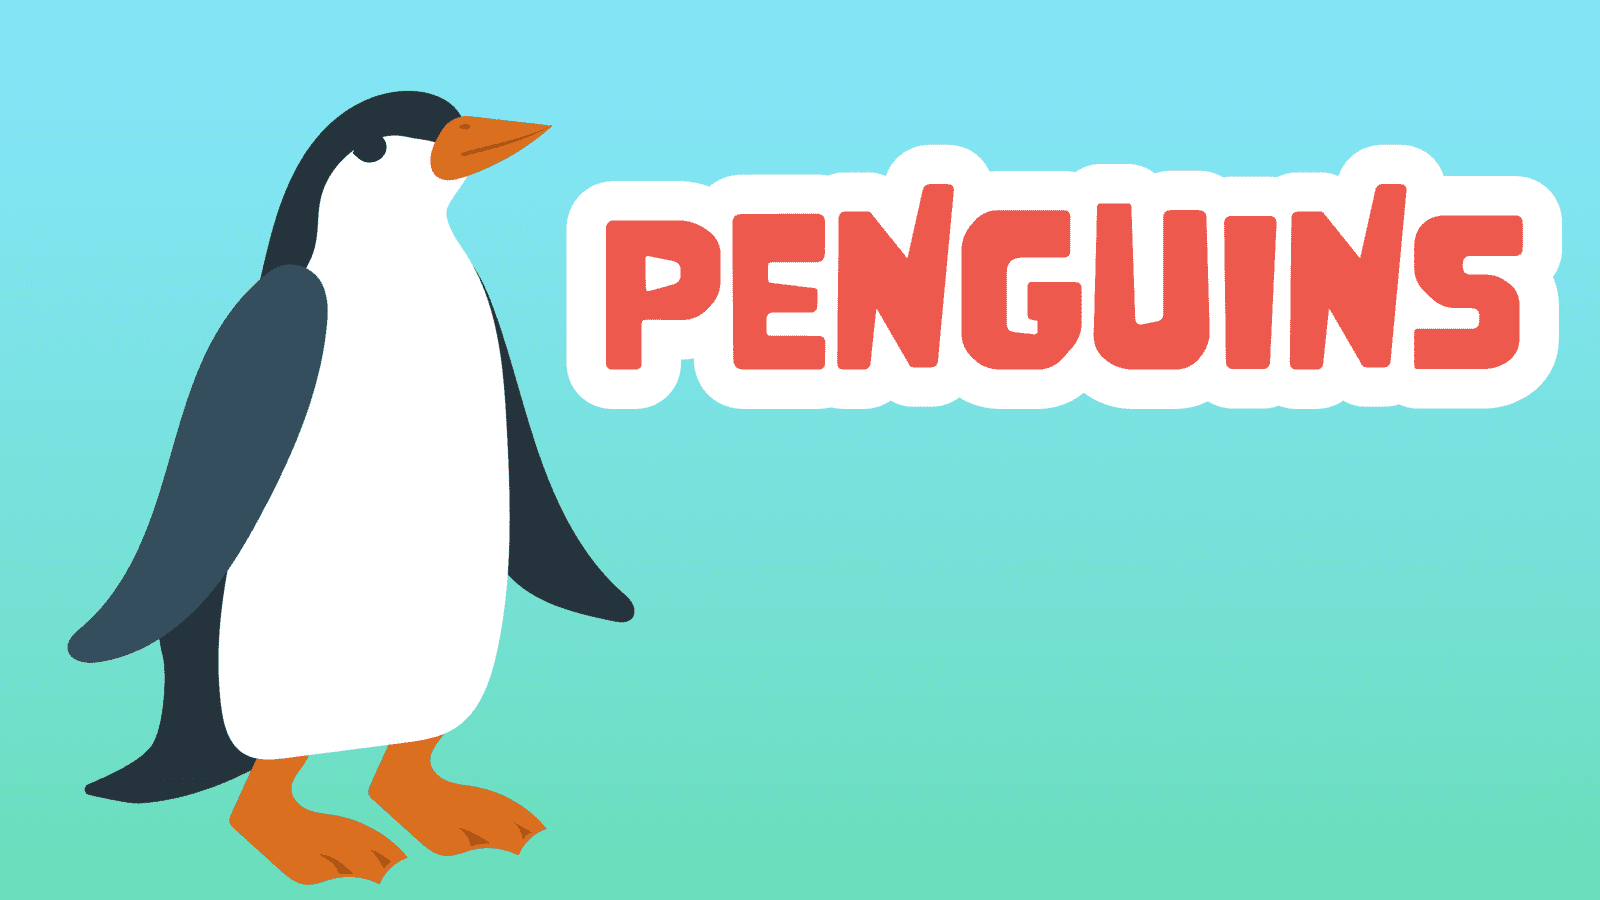 Penguins Facts for Kids – 5 Powerful Facts about Penguins